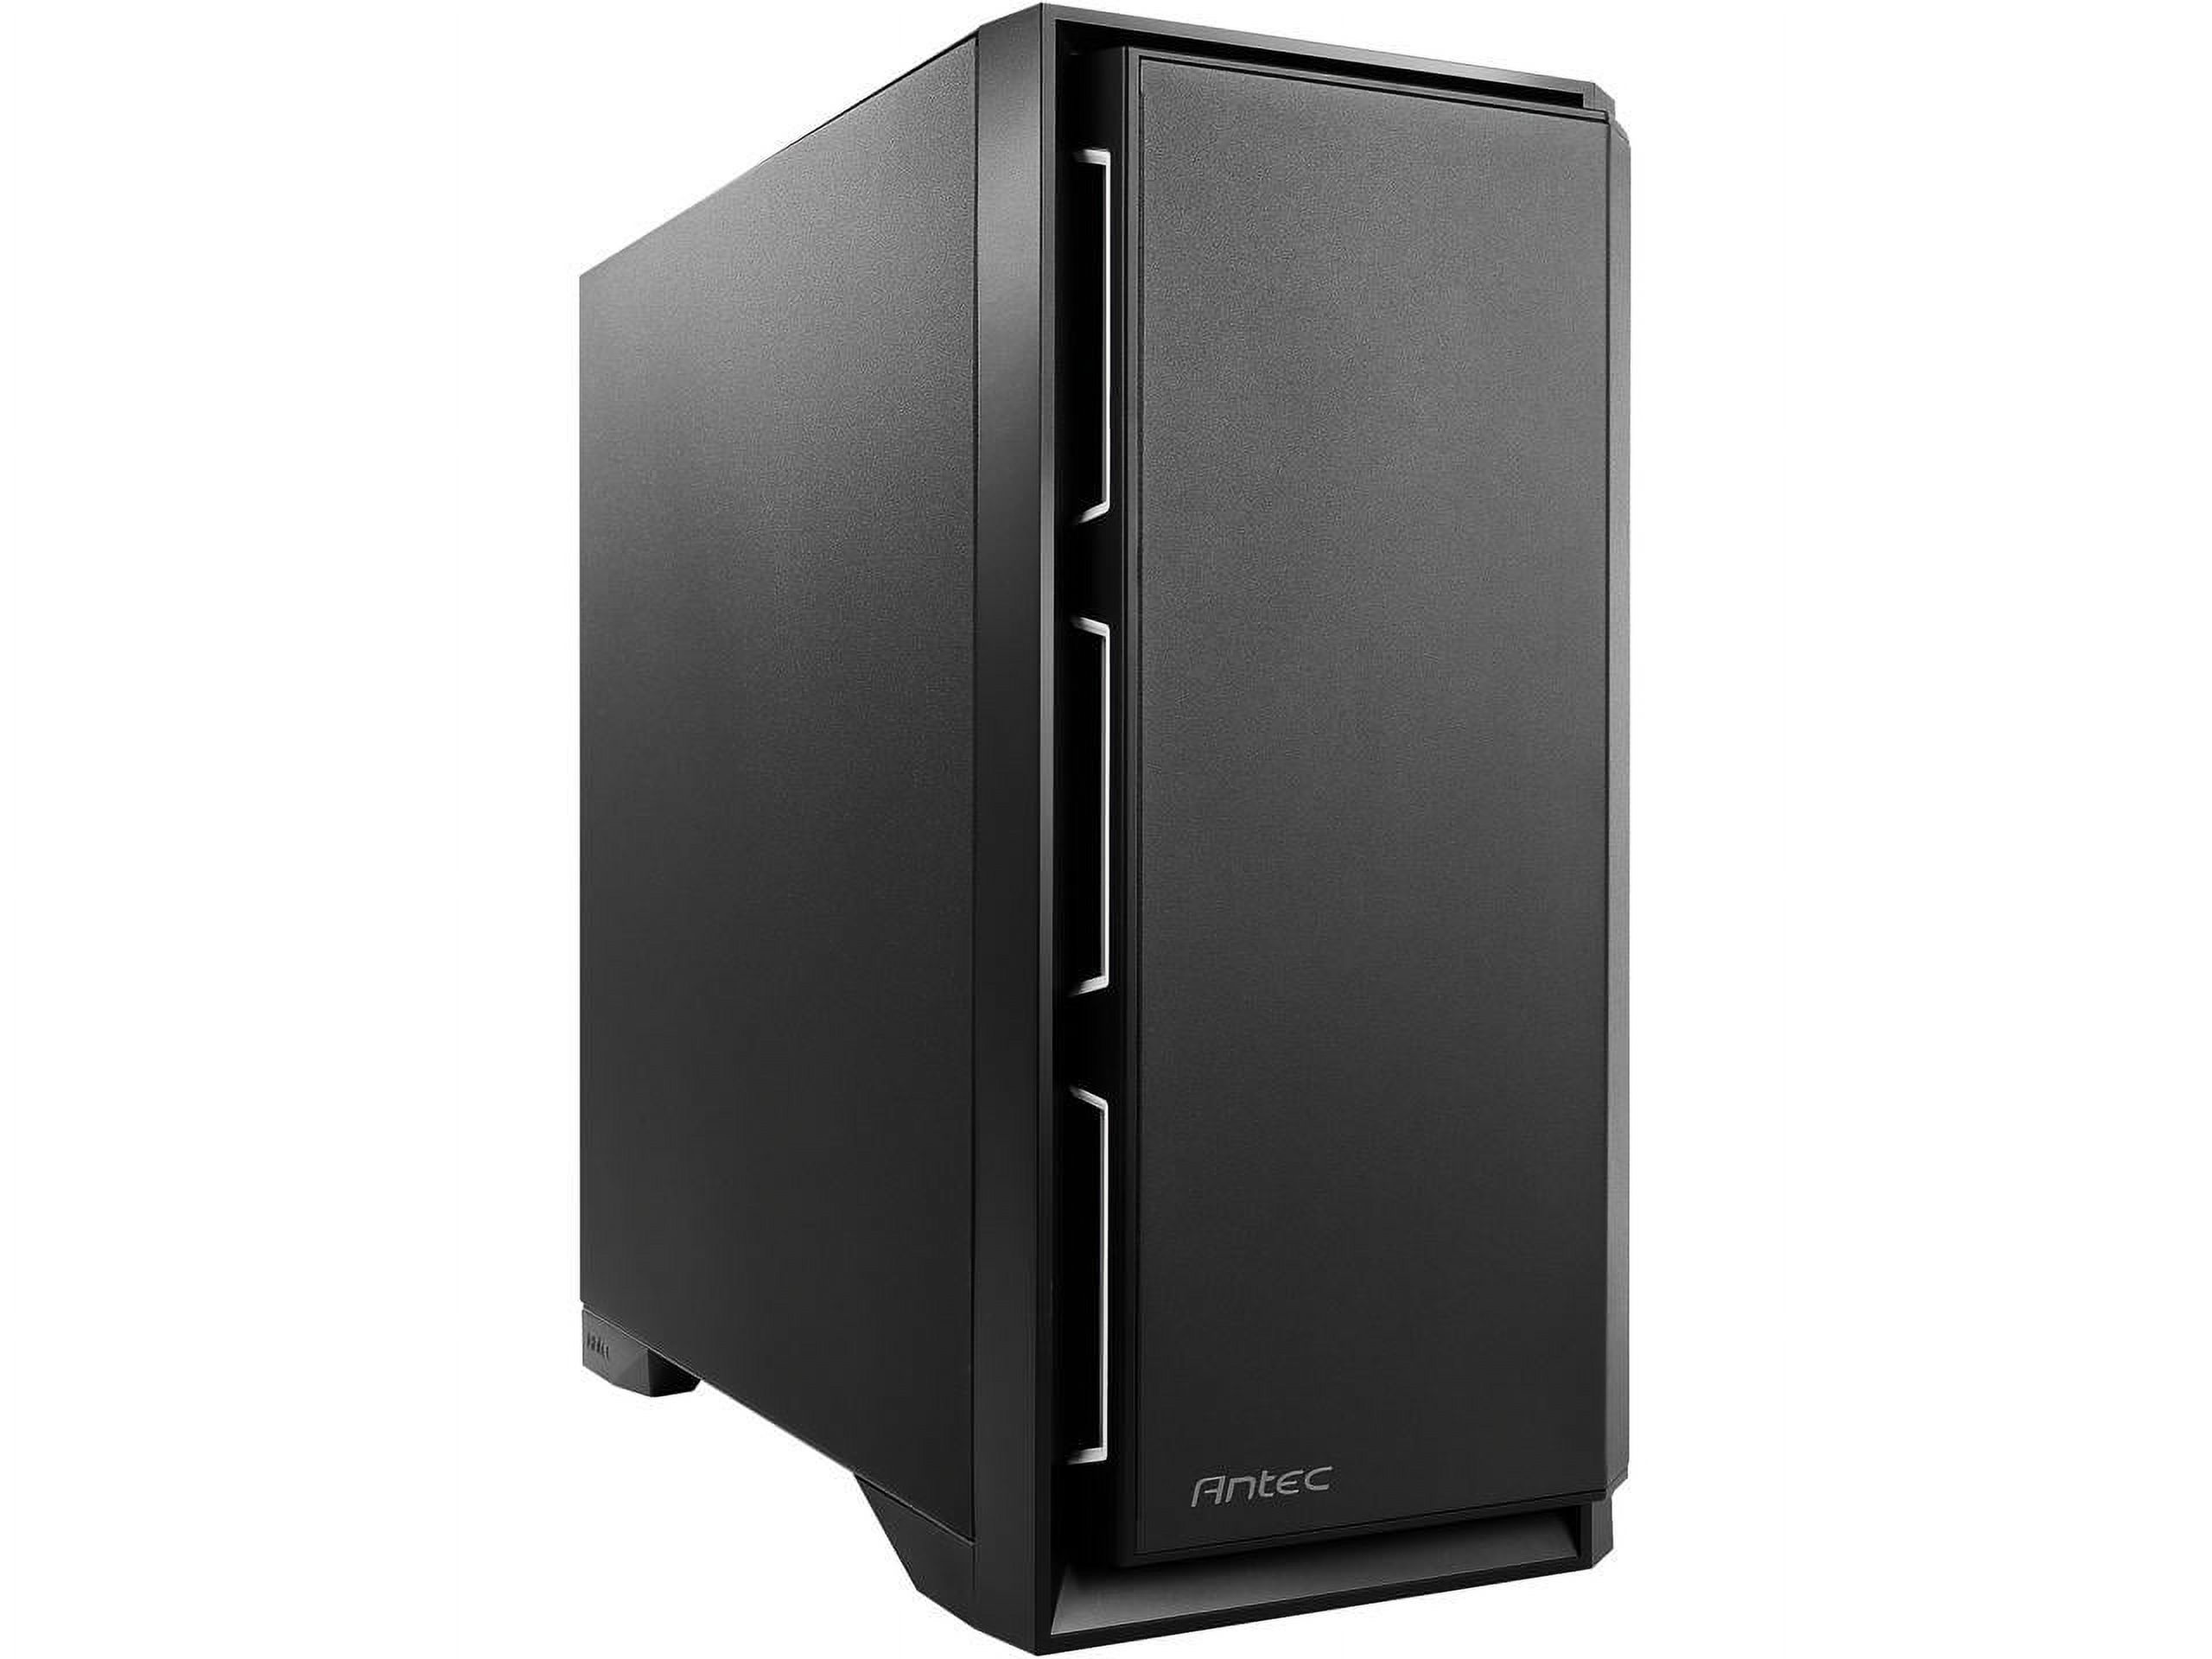 Antec Performance Series P101 Silent Black 0.8mm SPCC ATX Mid Tower Case with 8 x 3.5" HDD / 2.5" SSD Removable Bays - image 1 of 19